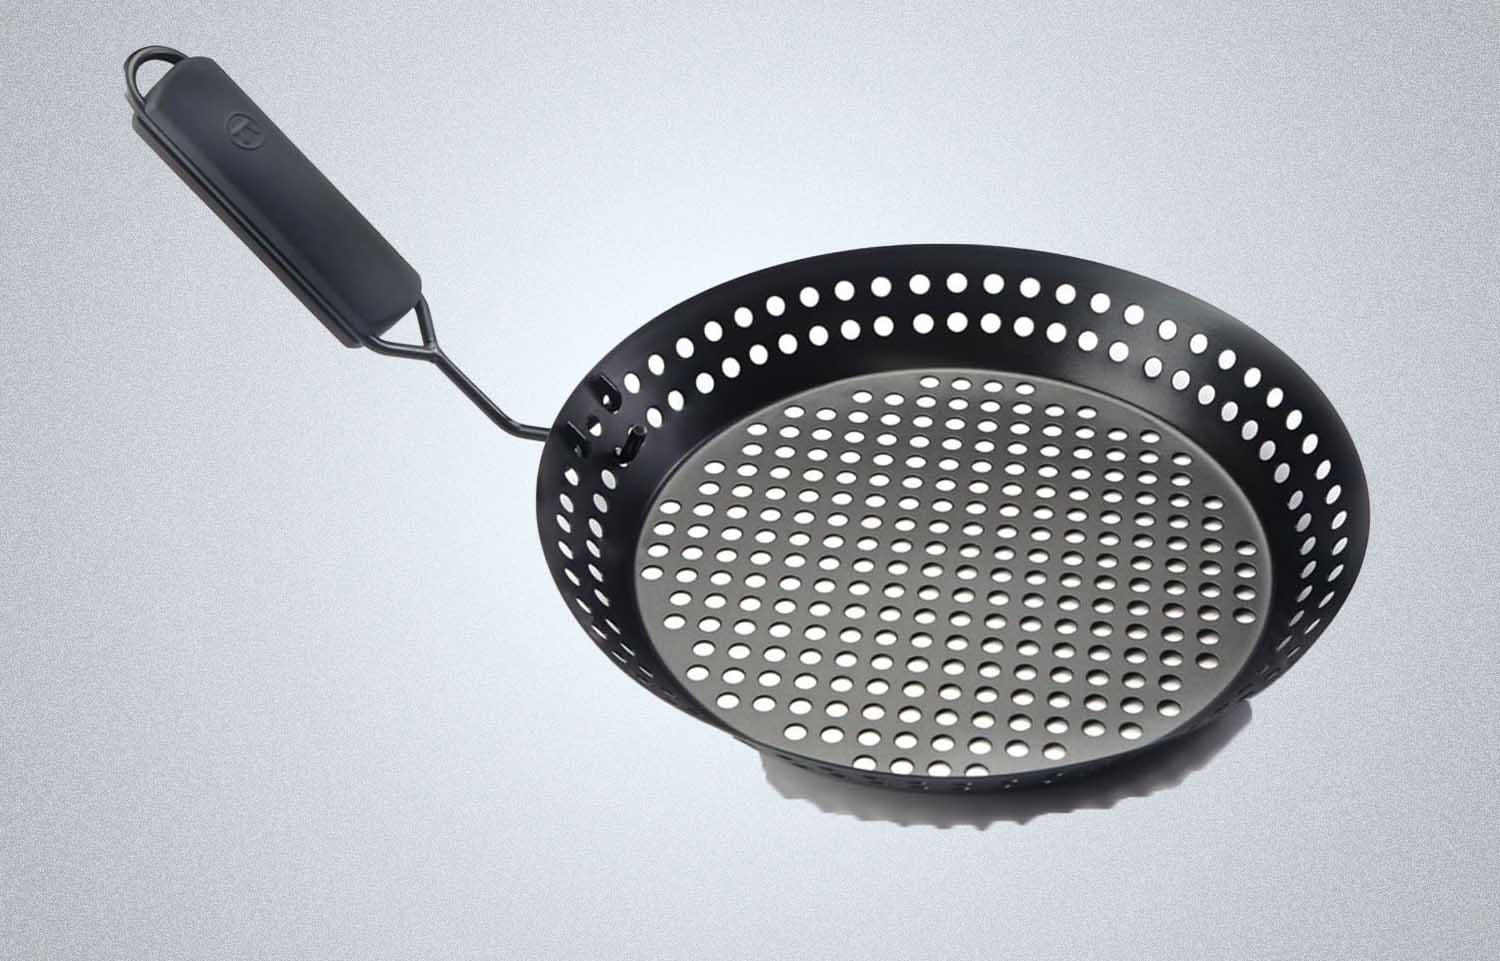 https://www.insidehook.com/wp-content/uploads/2023/06/Outset-76163-Non-Stick-1-EA-Grill-Skillet-with-Removable-Handle-.jpg?fit=1200%2C769